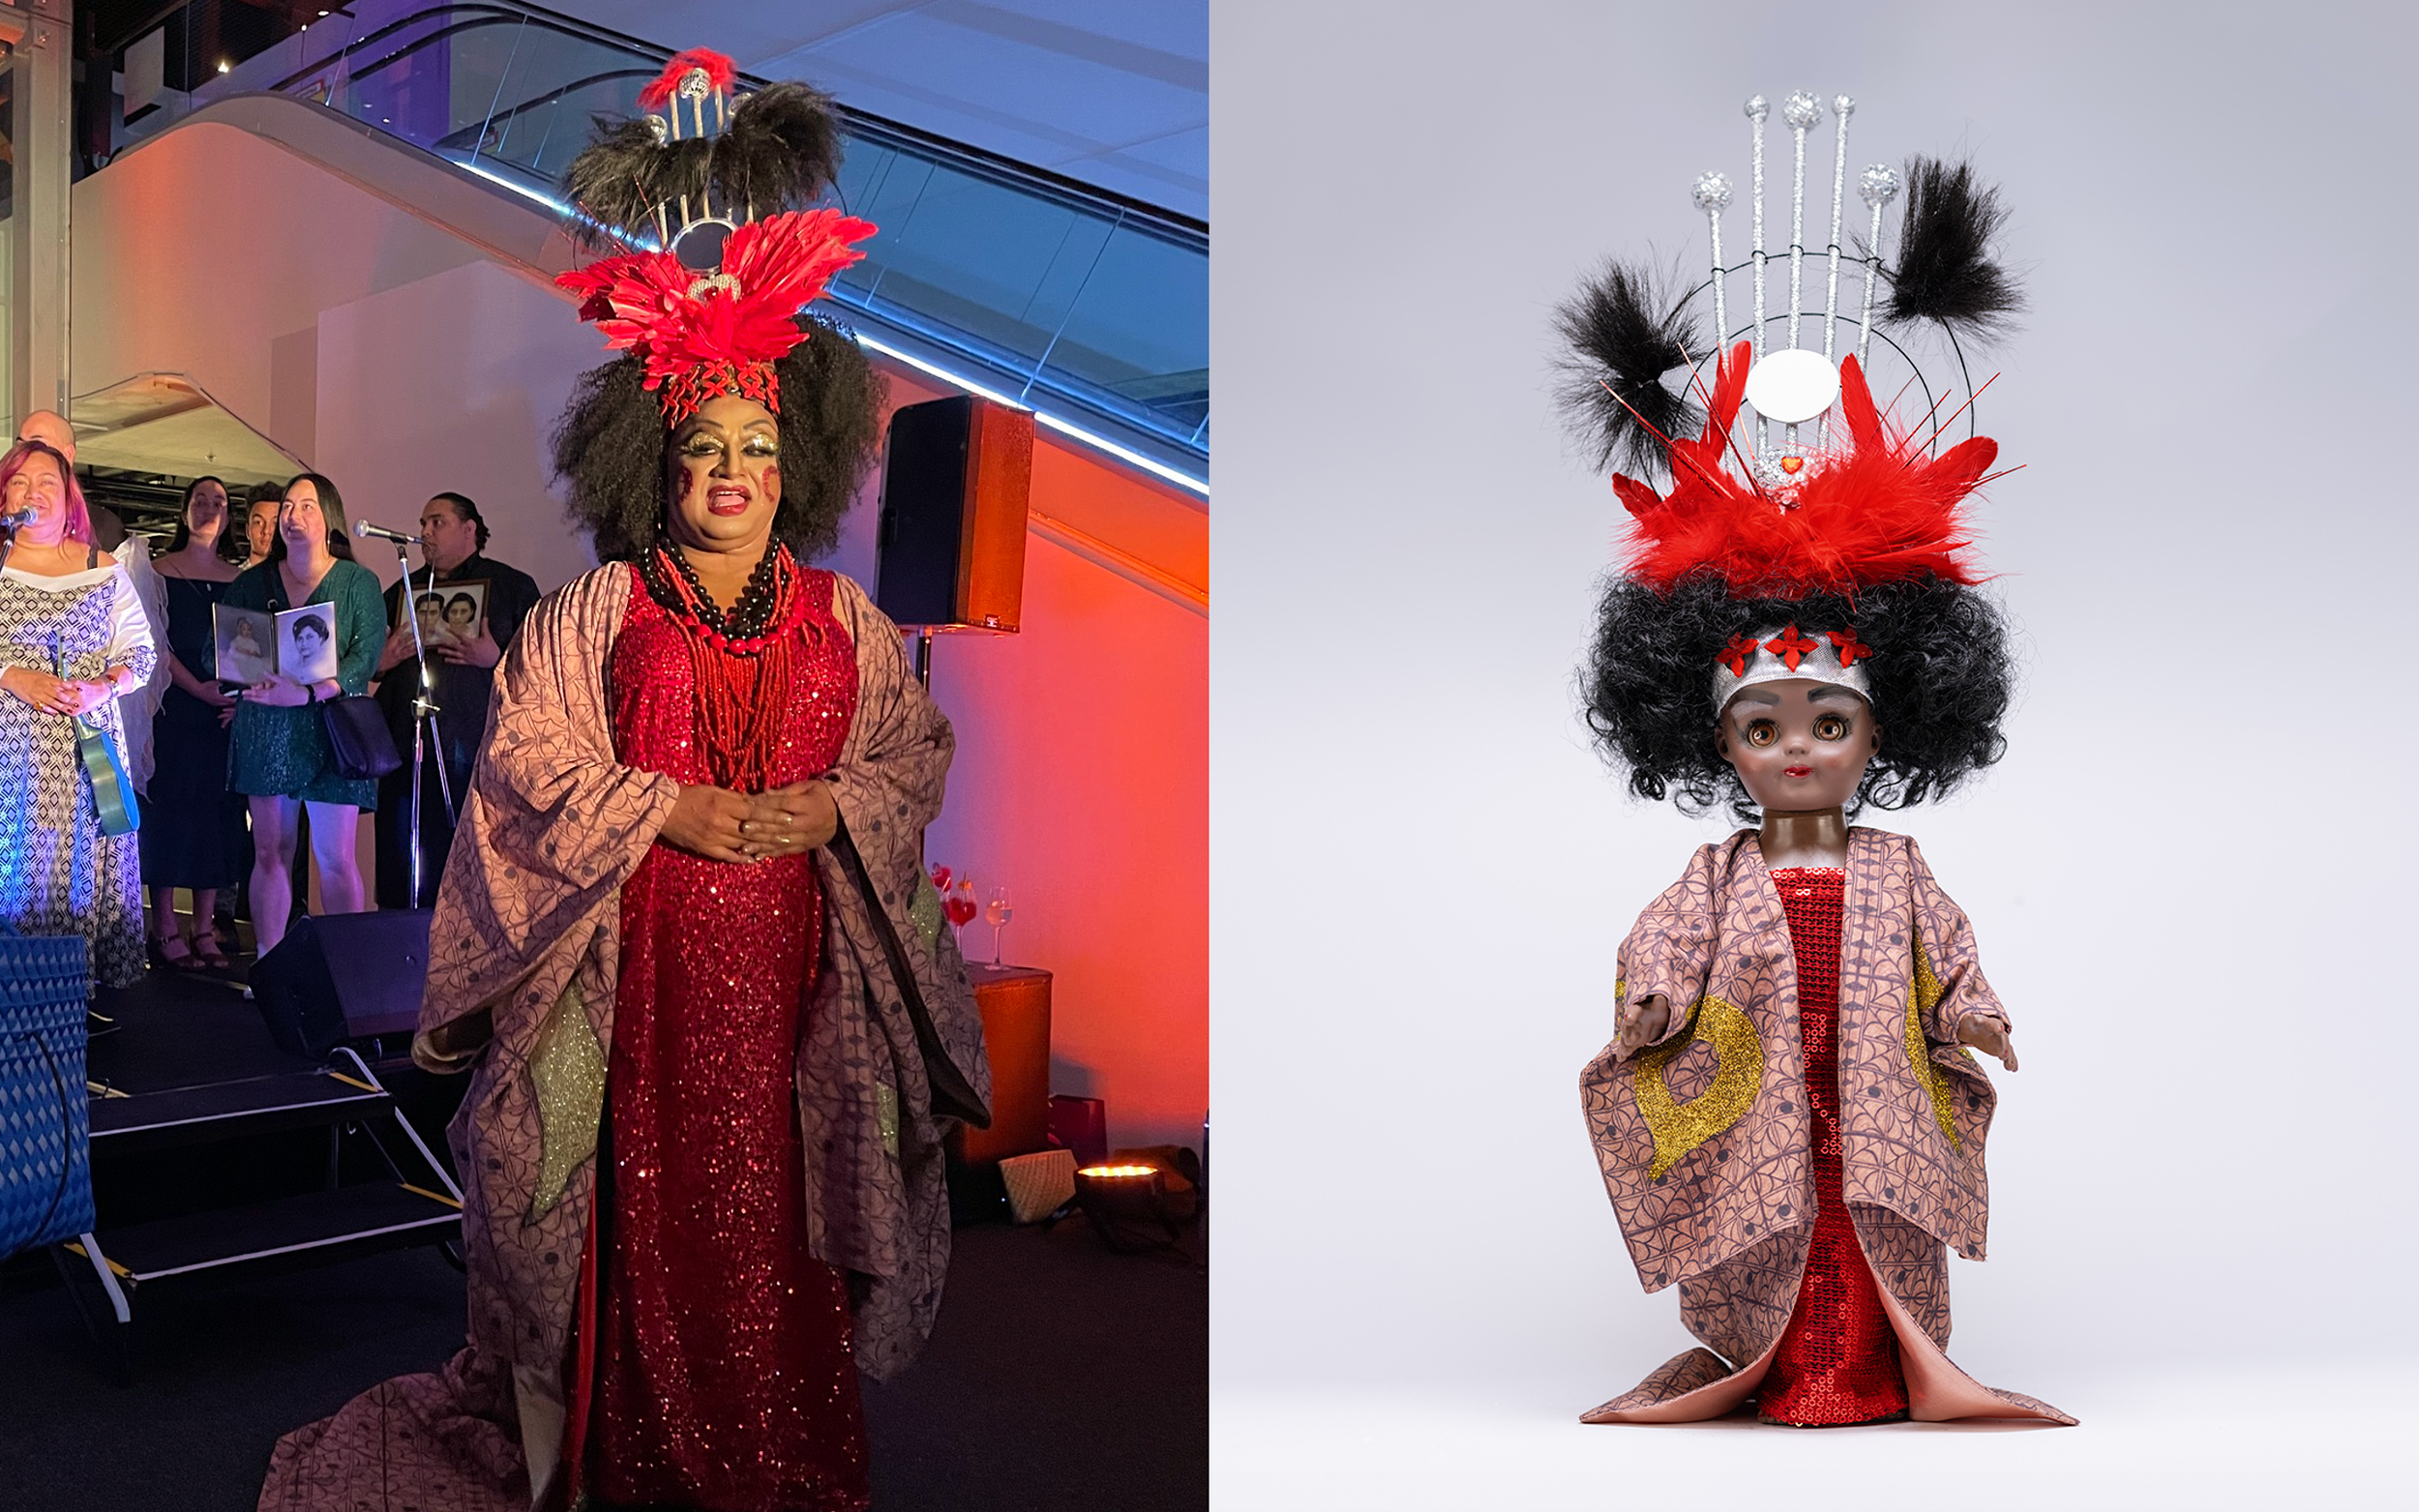  LEFT: ‘BERTHA in performance with Samu family’ during the opening celebration of ‘BERTHA’ (2023) exhibition by Yuki Kihara curated by Natalie King presented at the Powerhouse Museum held on Thursday 24th August 2023. BERTHA’s finale outfit consistin